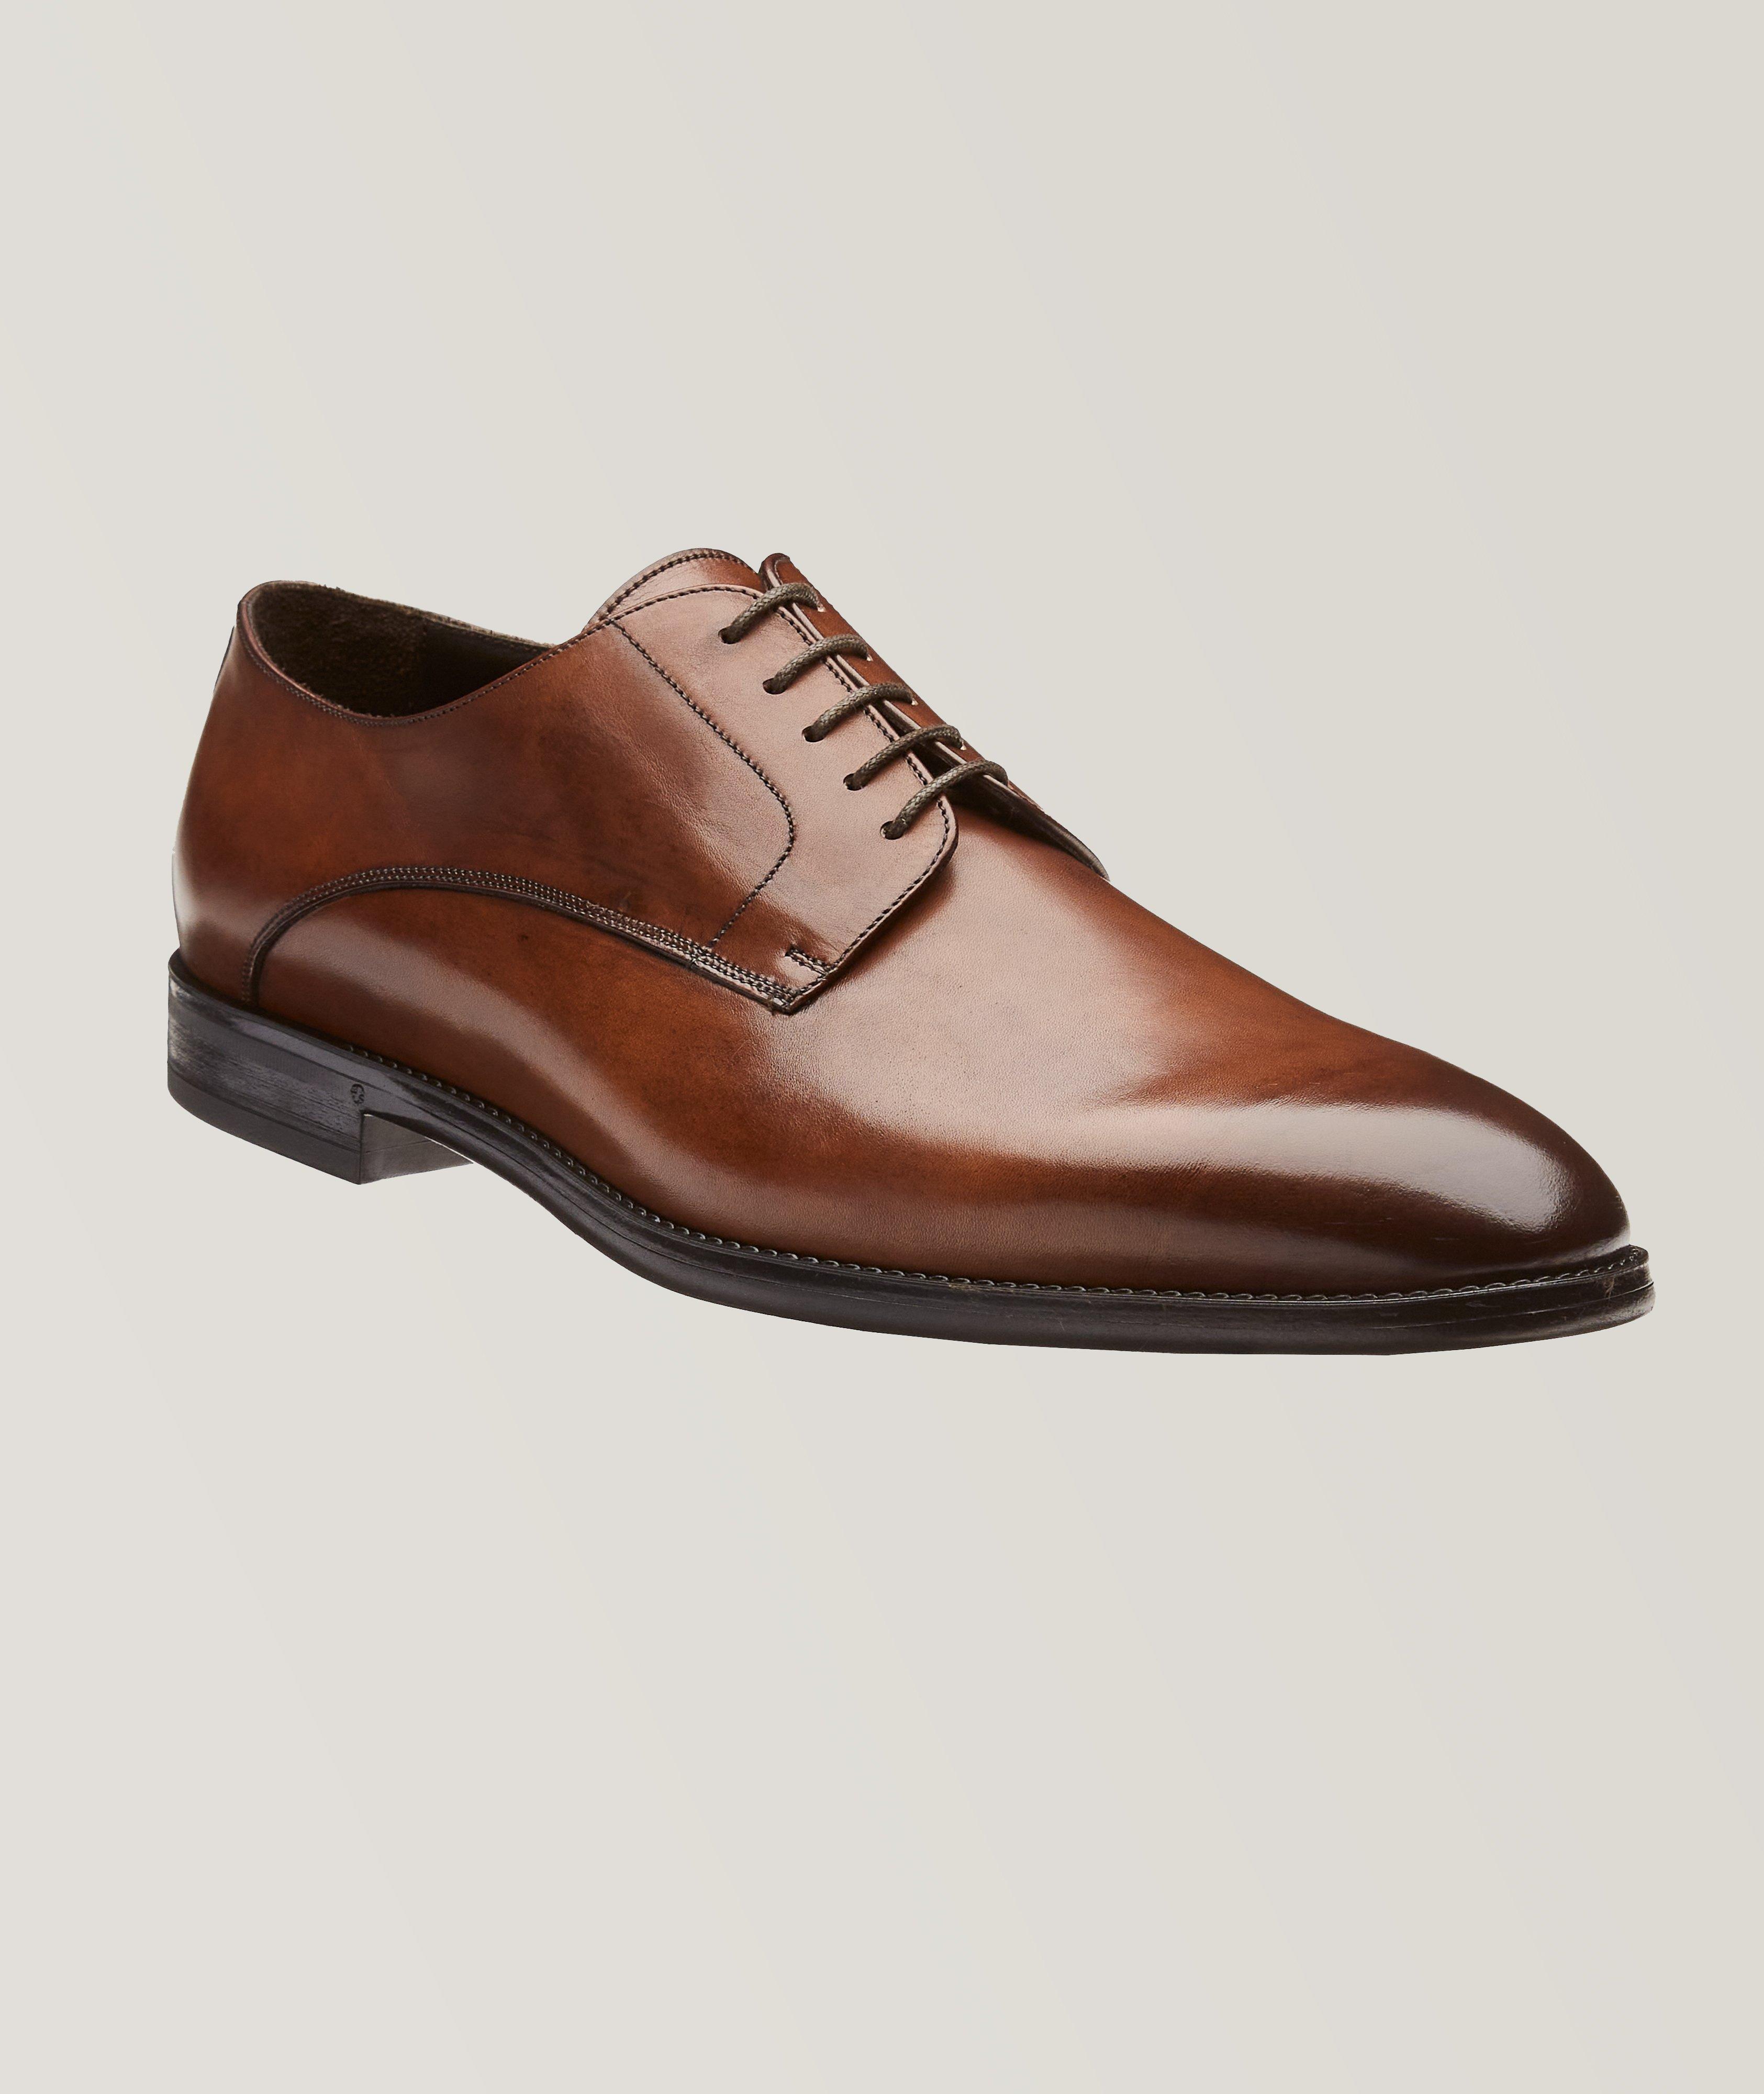 Amedeo Derby Lace-Up image 0